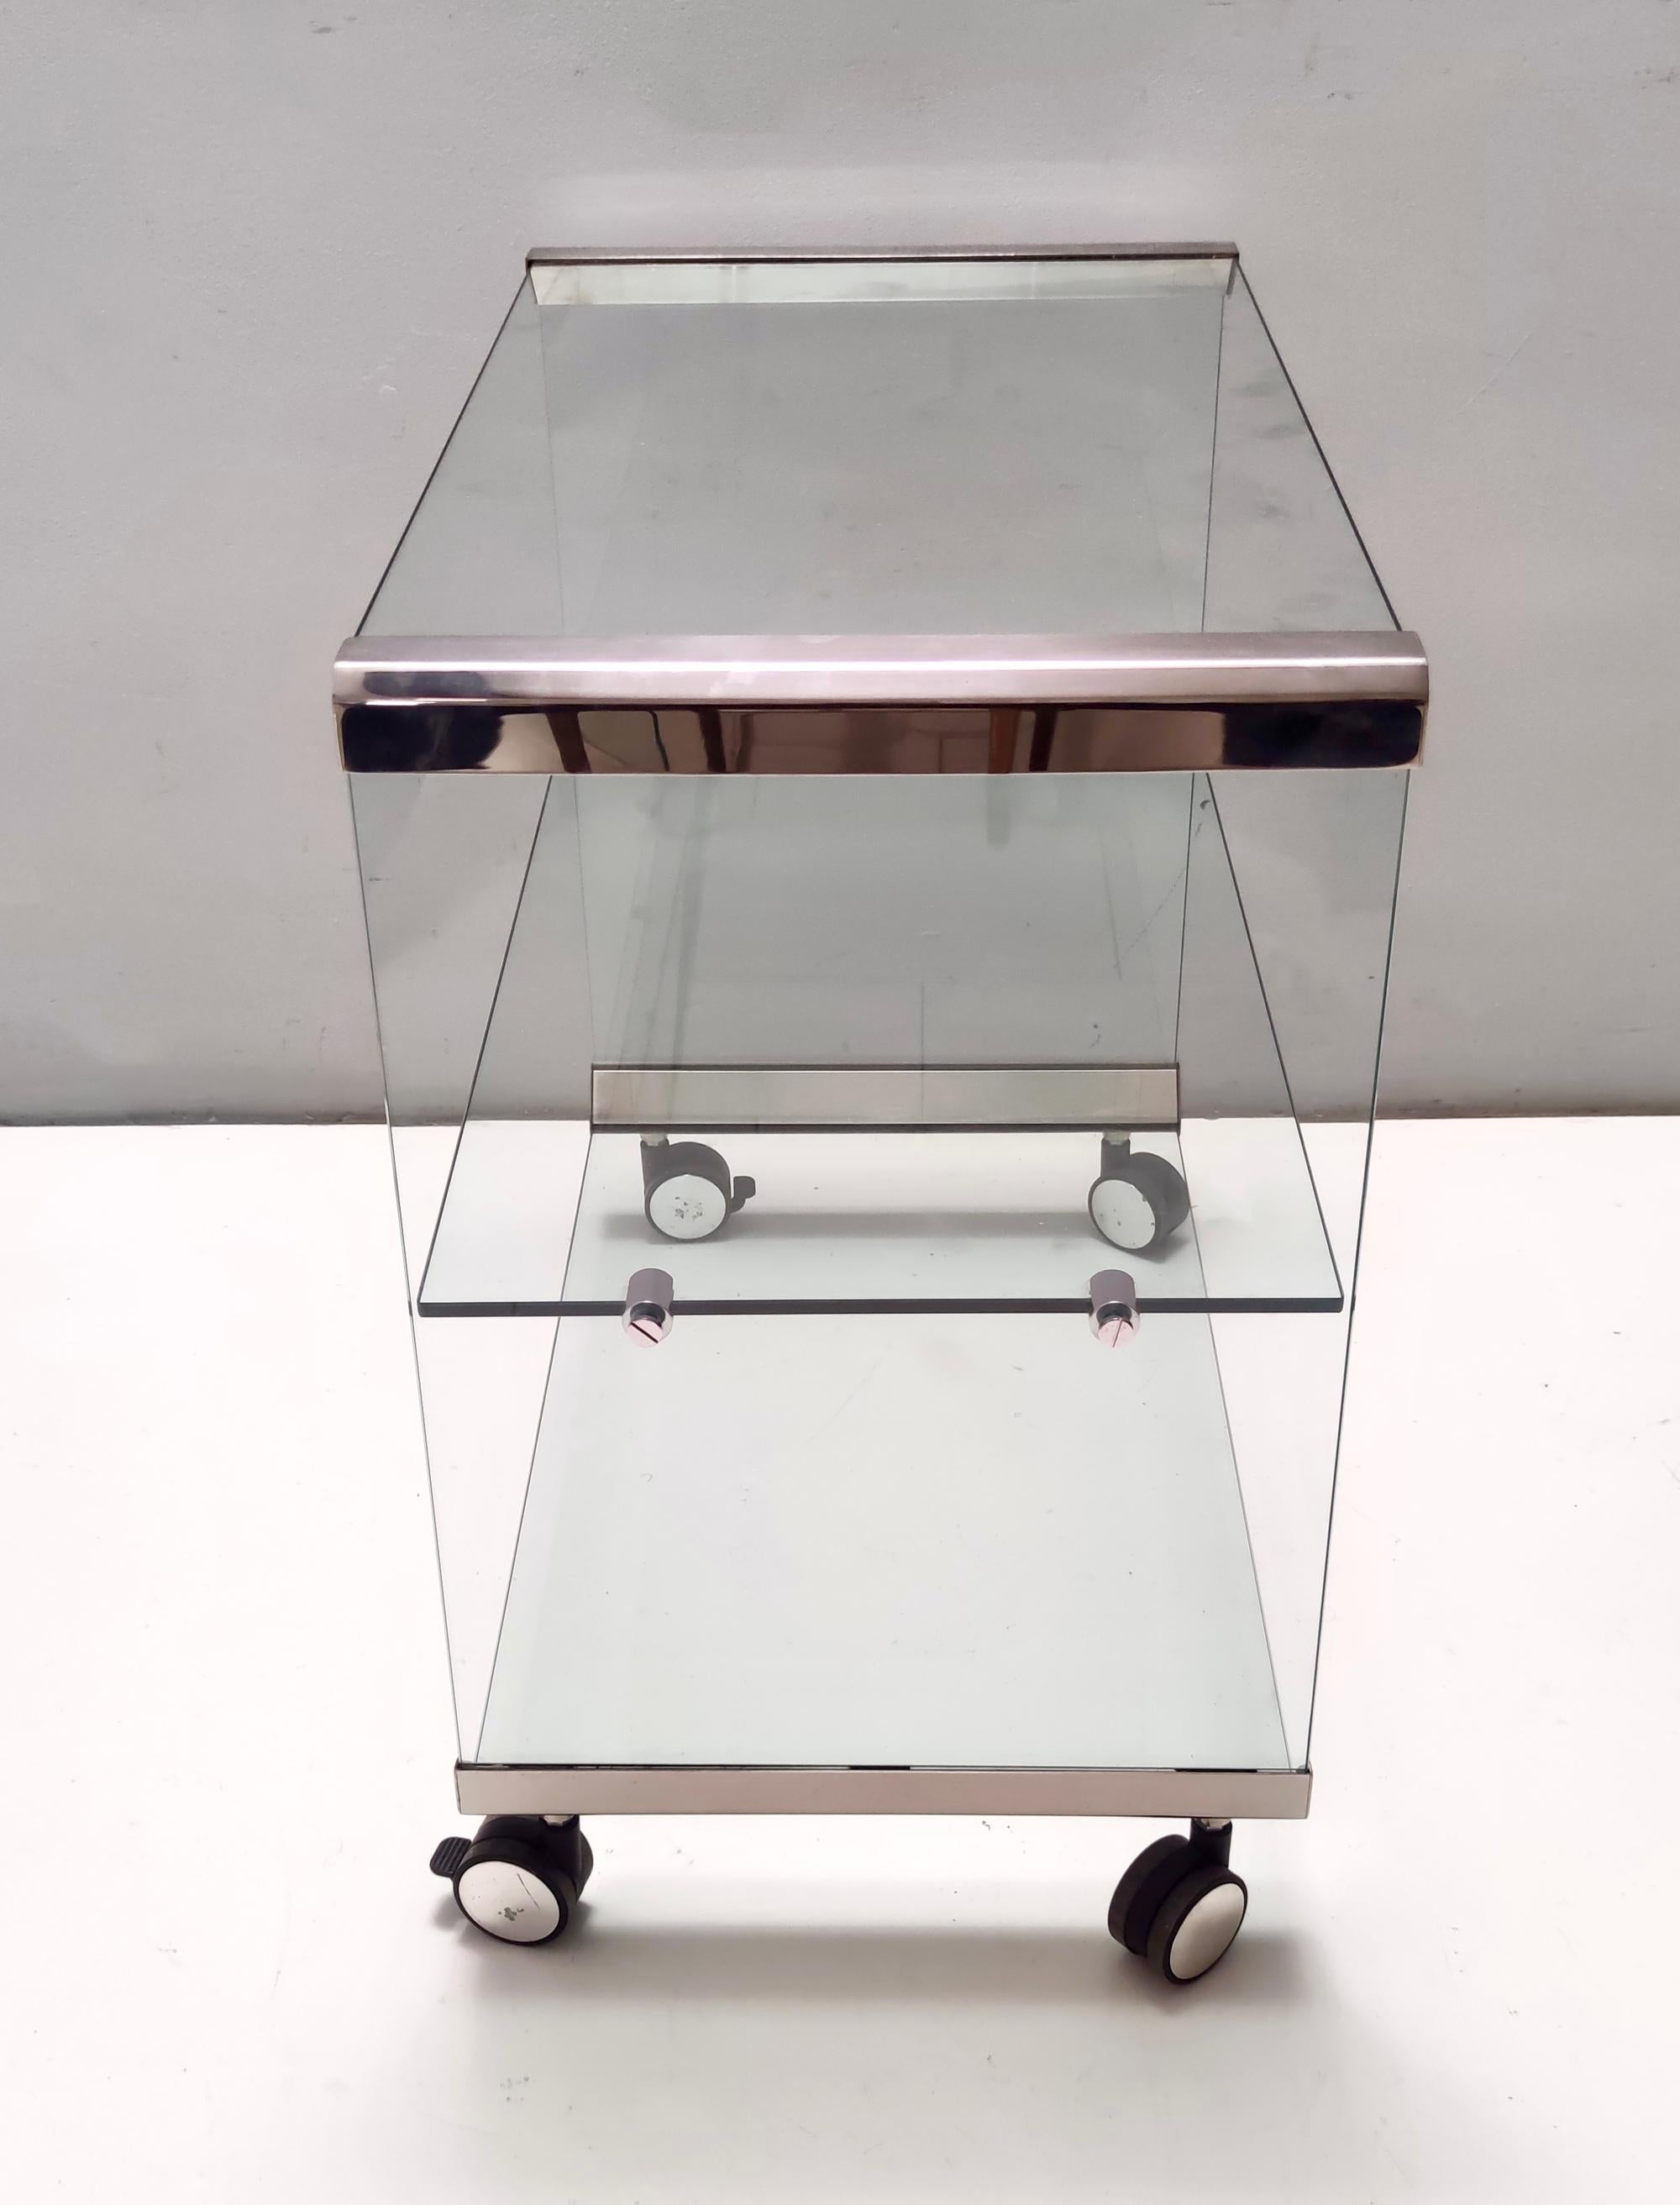 Made in Italy, 1970s - 1980s.
This etagere / side table is made in tempered glass and features a glass shelf, steel parts and casters.
It may show slight traces of use since it's vintage, but it can be considered as in excellent original condition